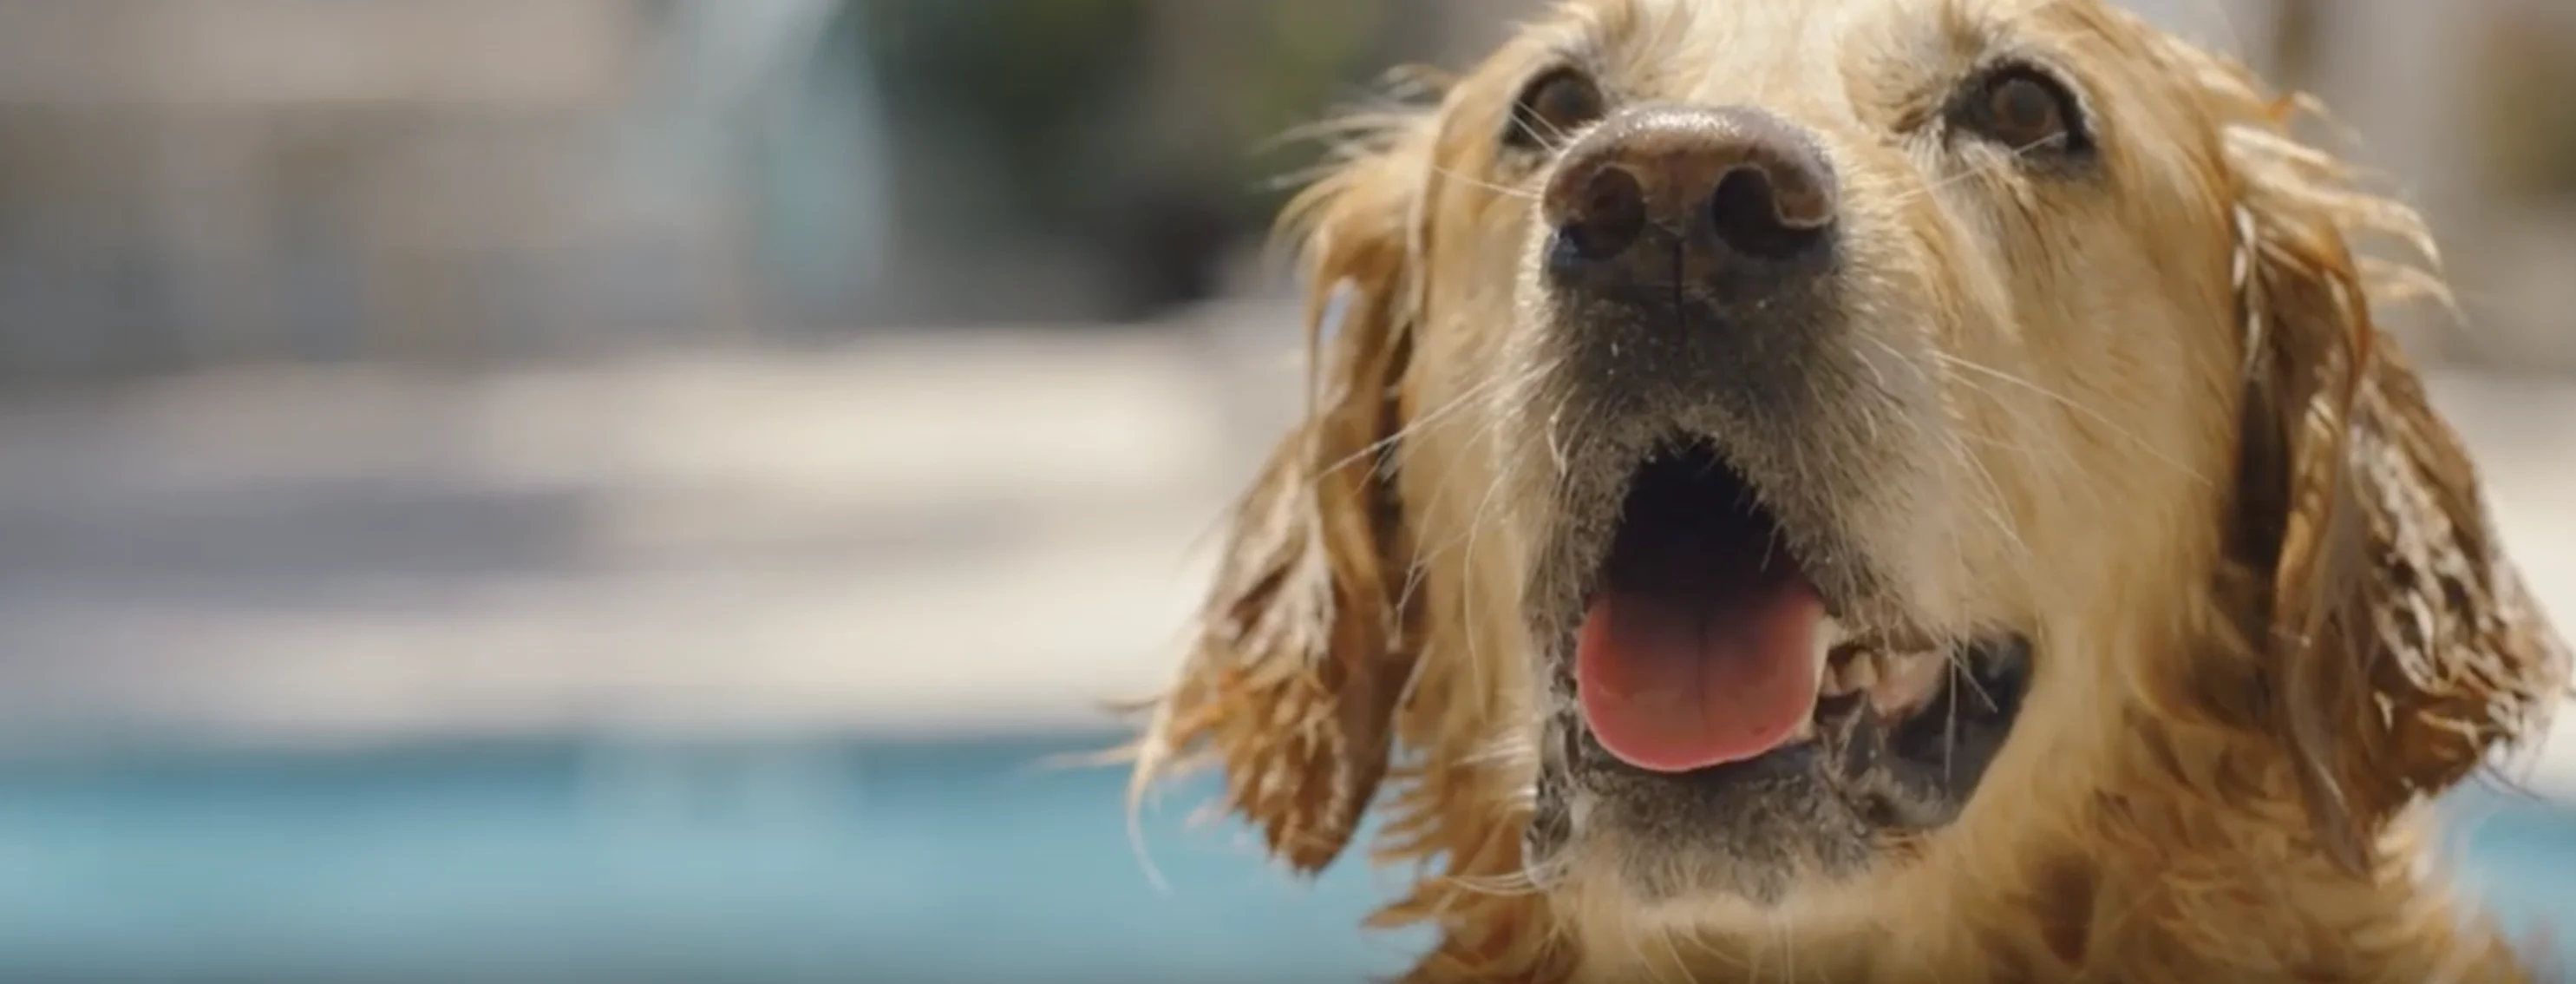 Dog in front of pool turning its head with its tongue out